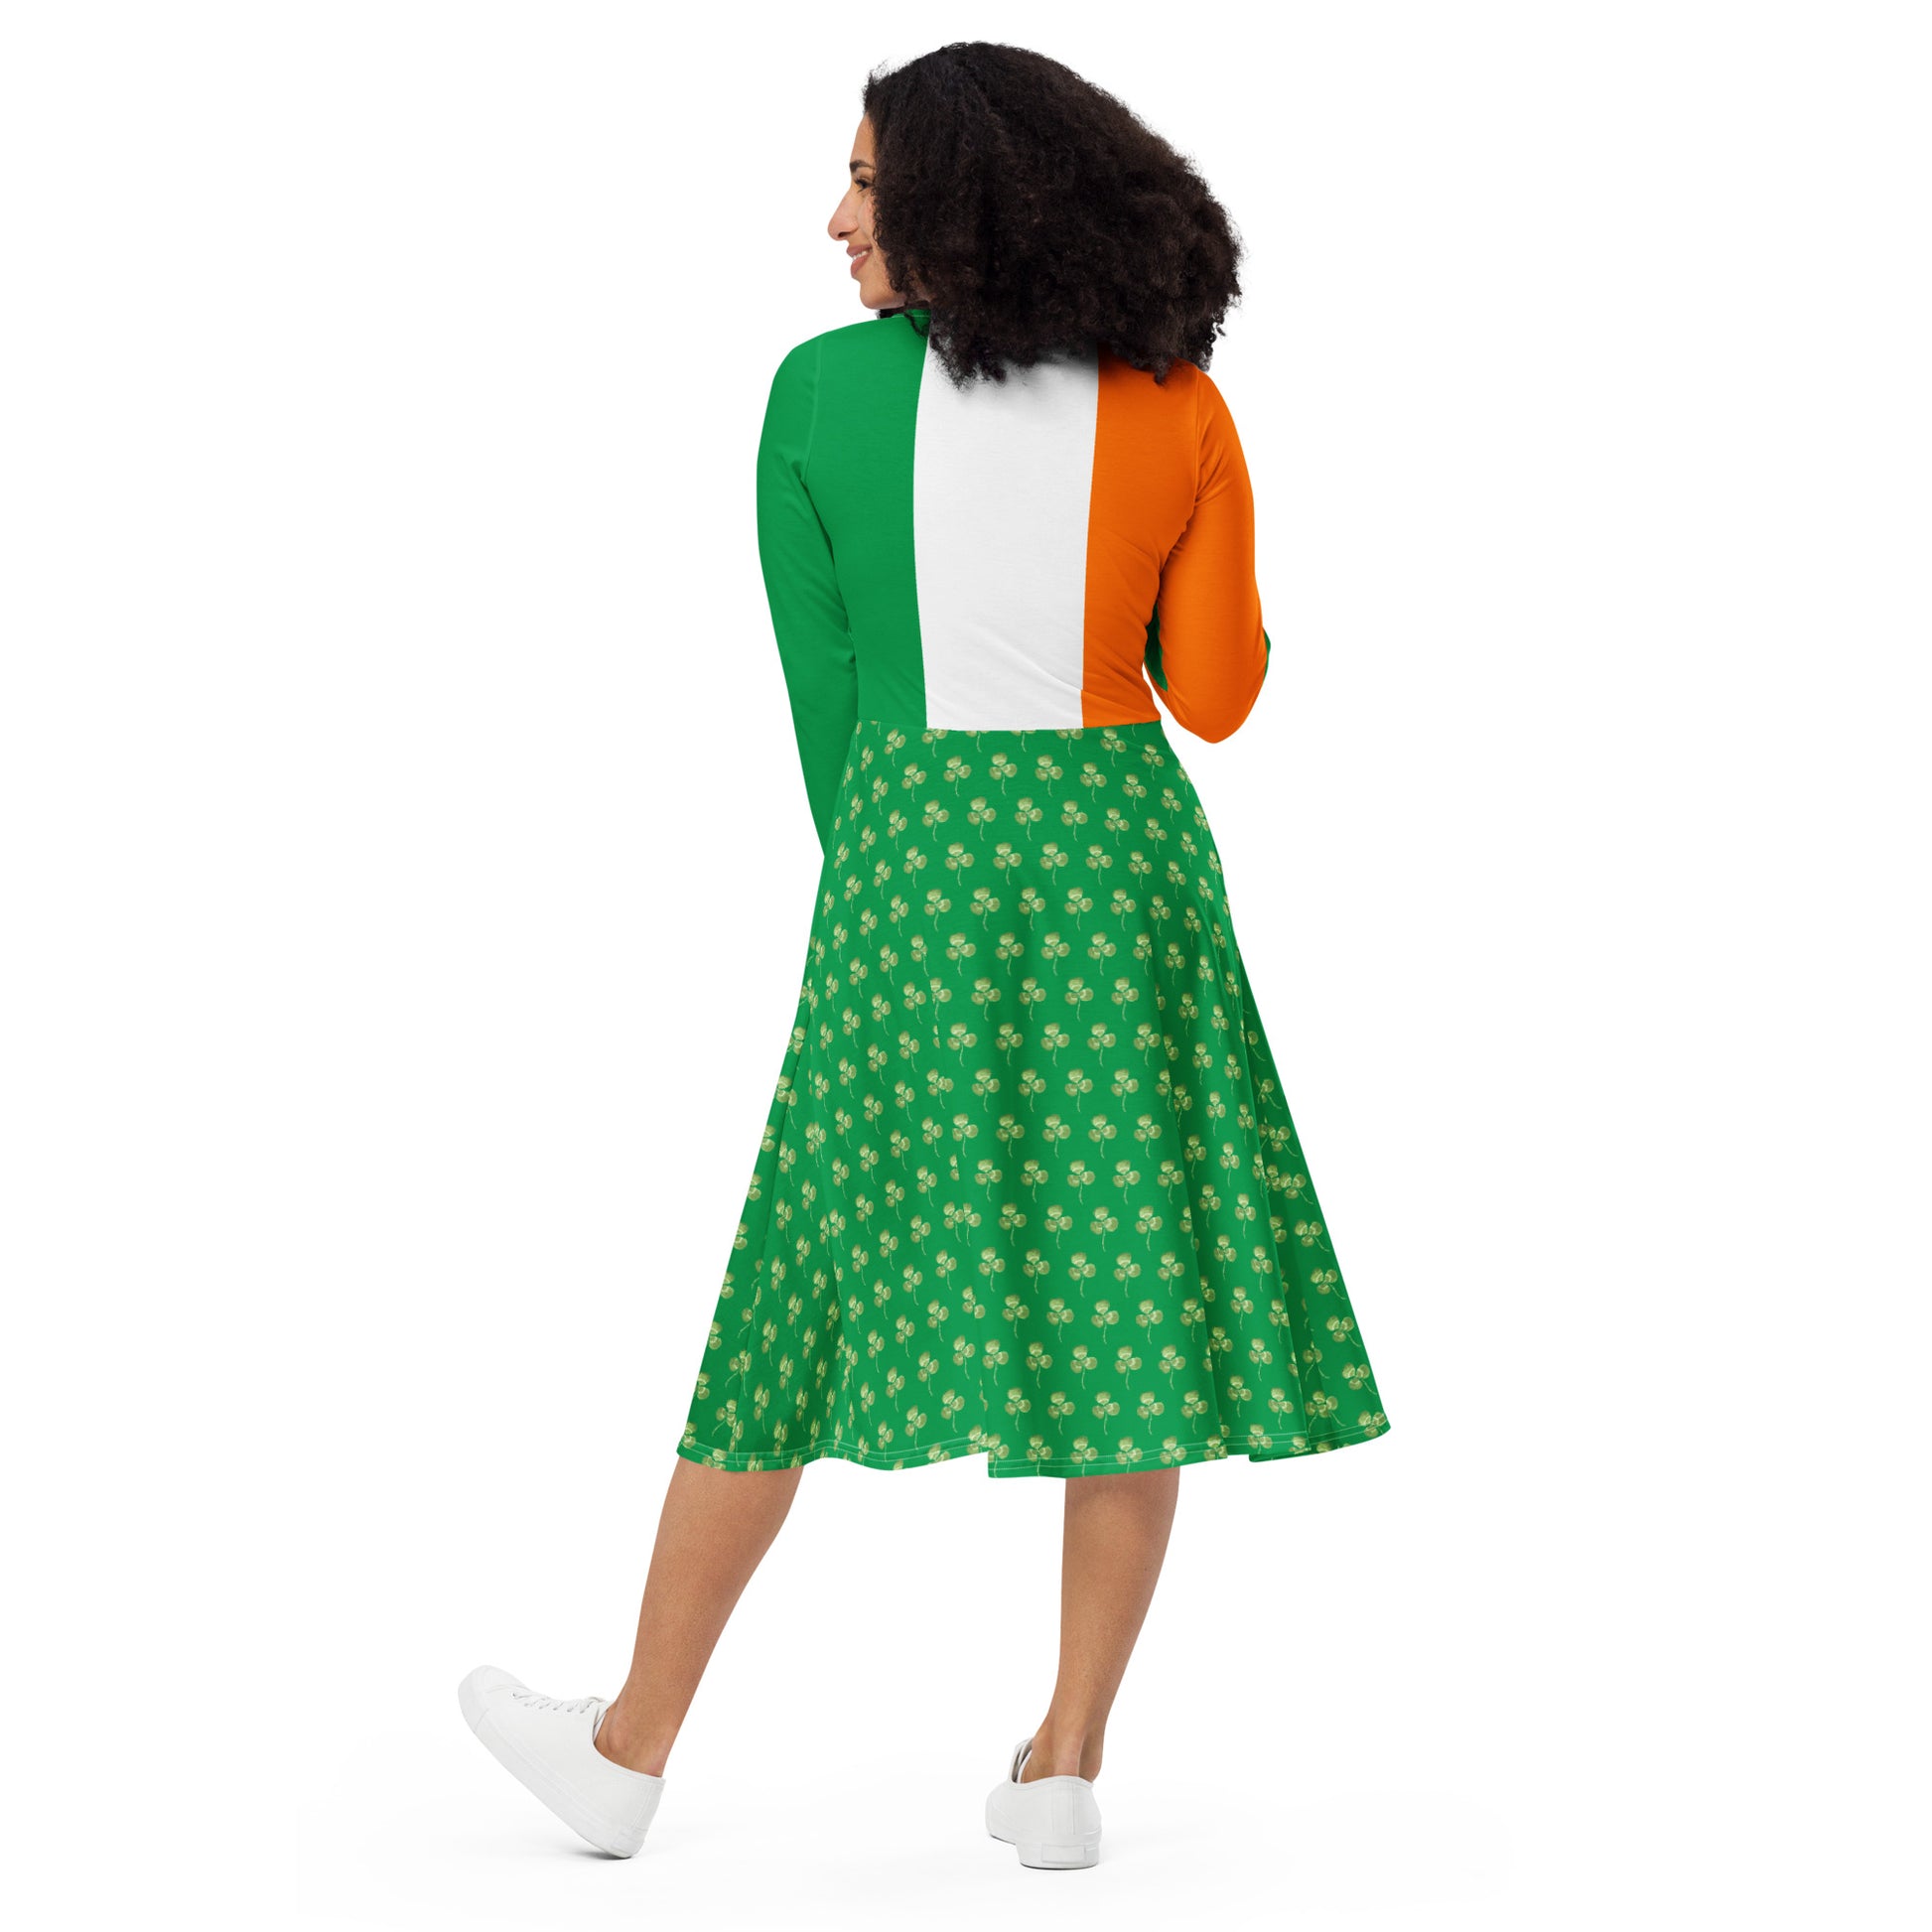 Irish Dress / Ireland Outfit With Colors Of The Ireland Flag / 2XS - 6 –